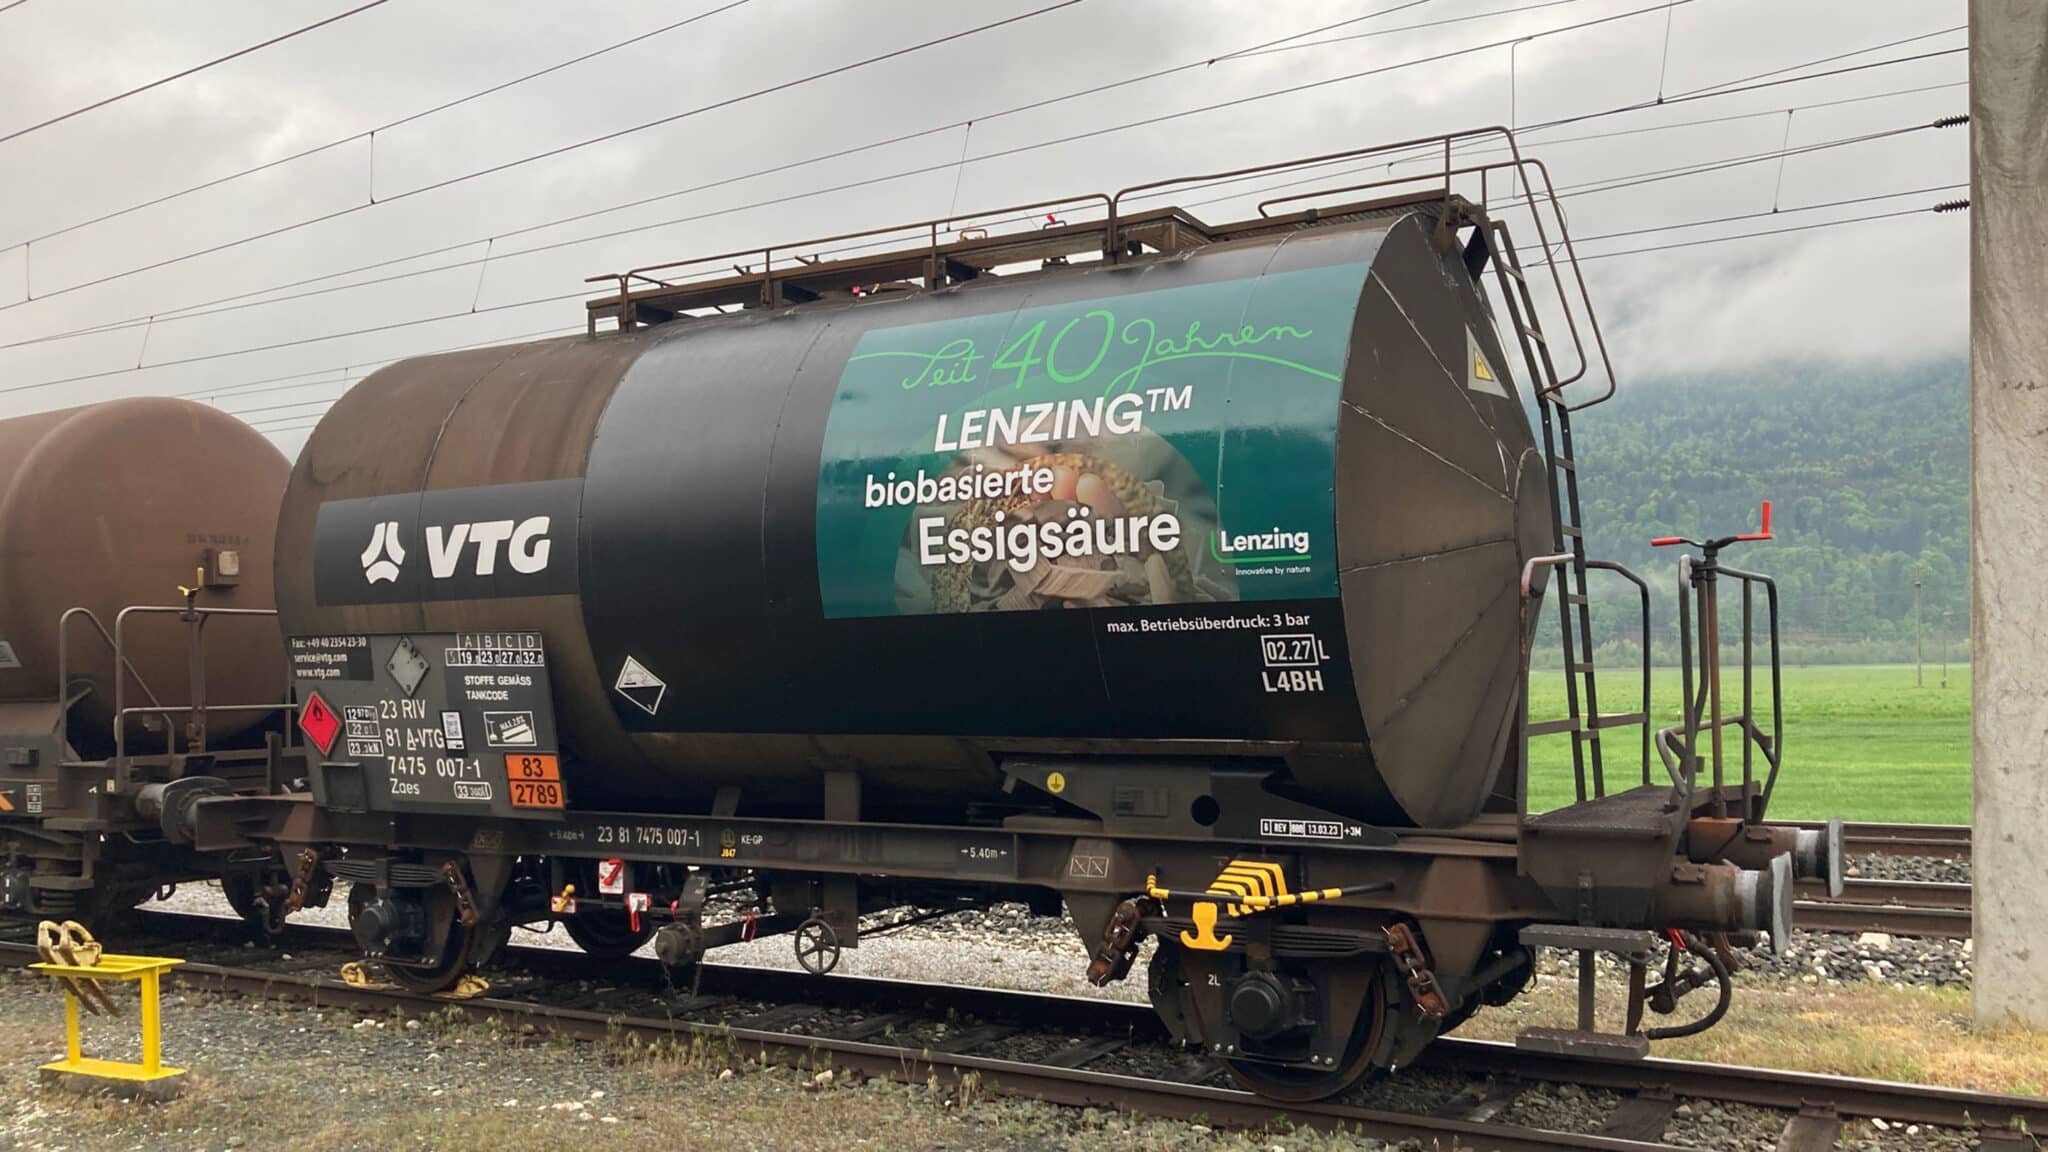 Tank car with the lettering "For 40 years LENZING™ bio-based acetic acid" stands on tracks.